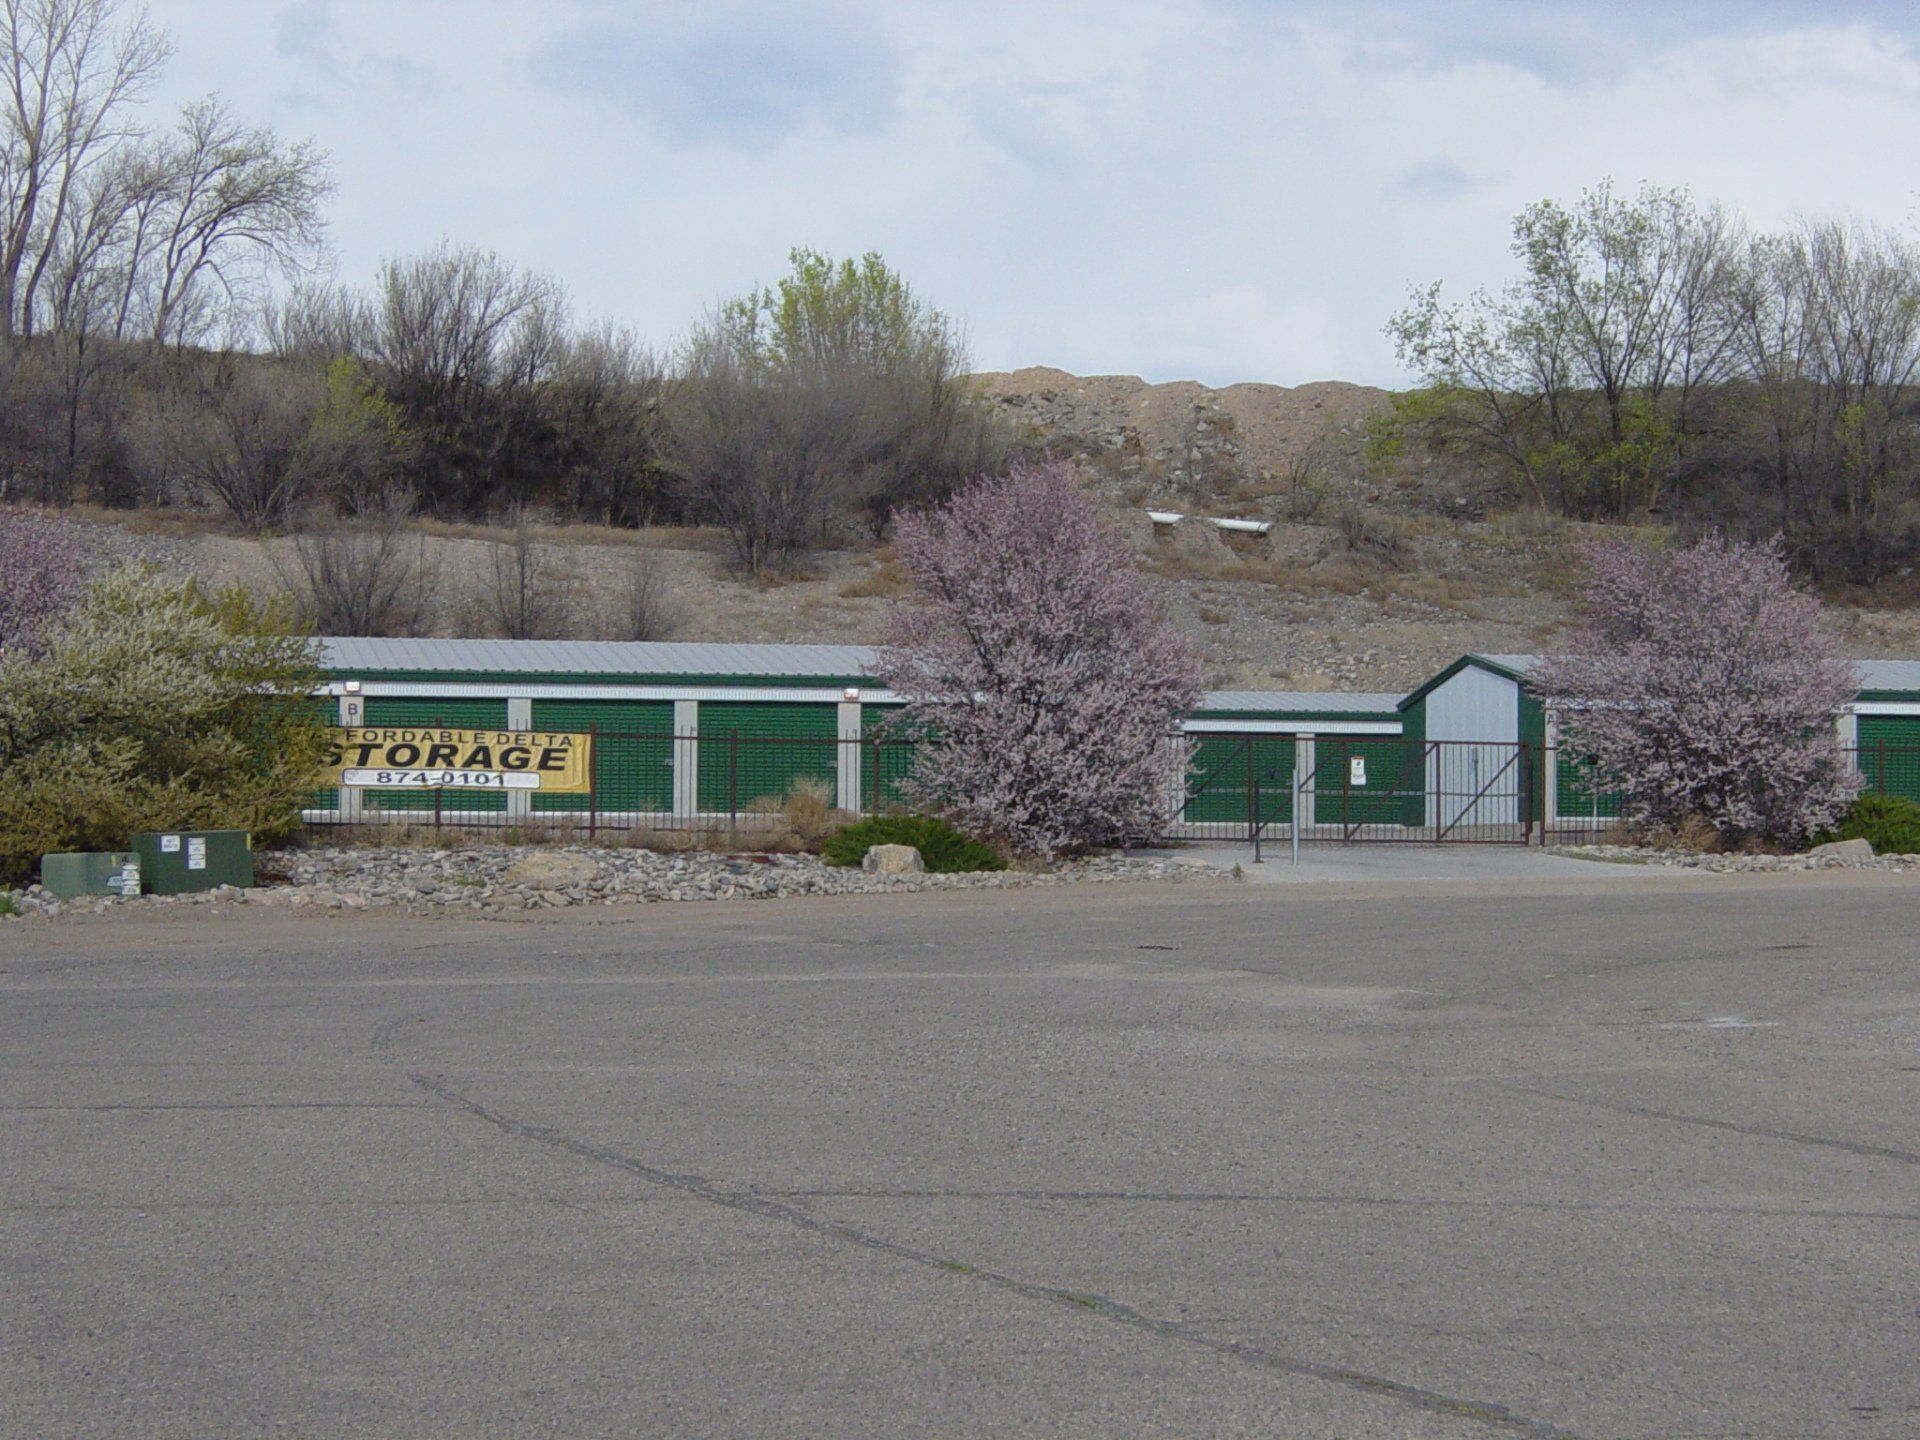 Storage Facility with Trees - Affordable Storage in Delta, CO